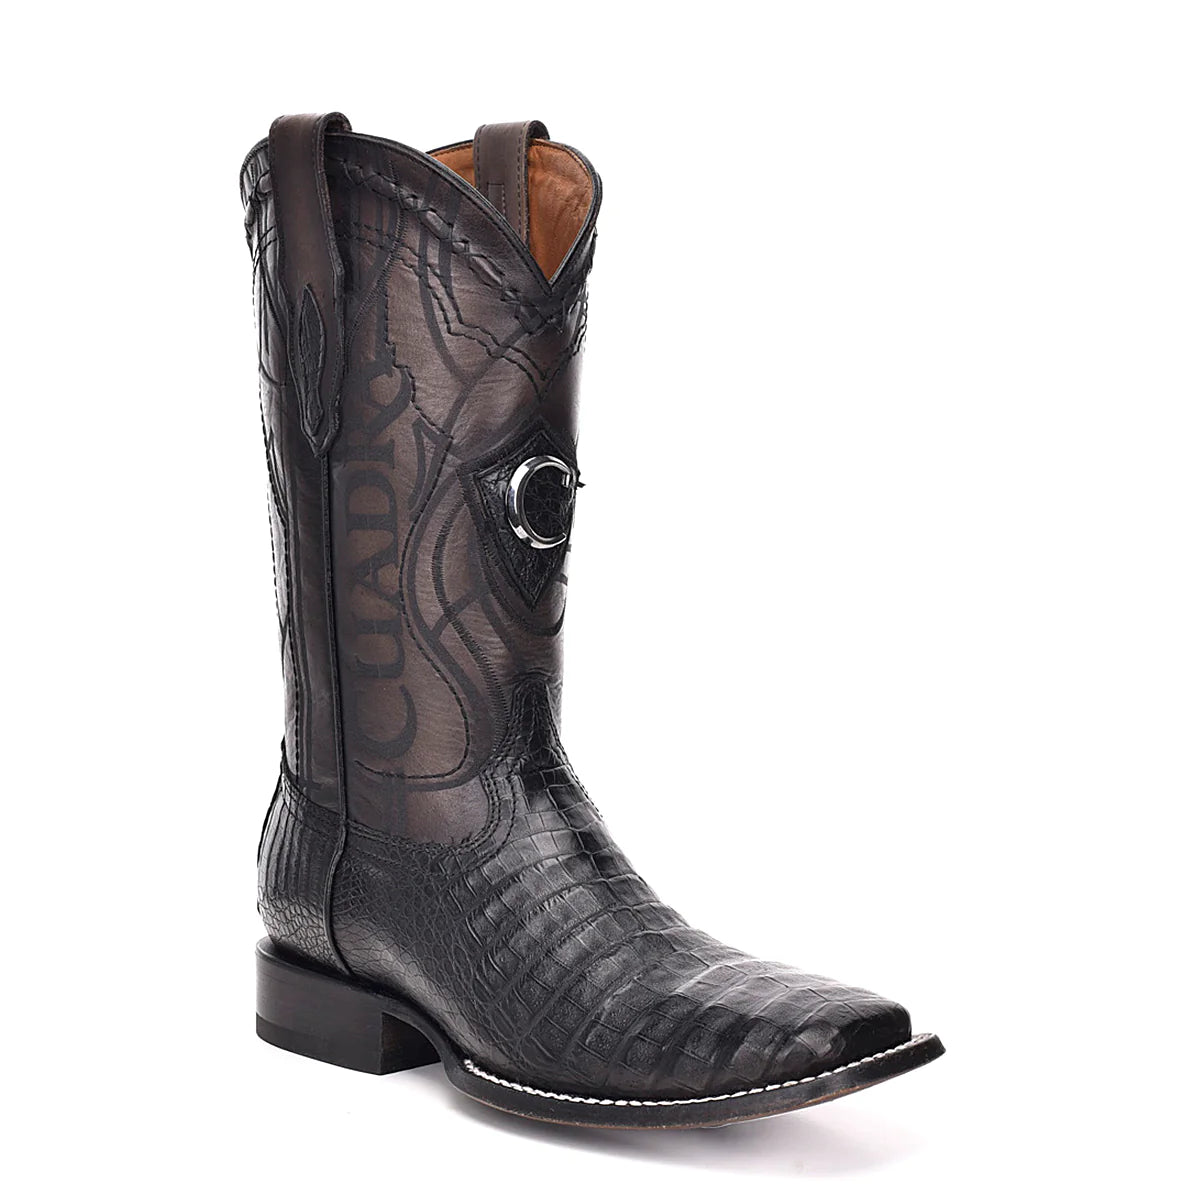 Cuadra Engraved black exotic leather cowboy boots